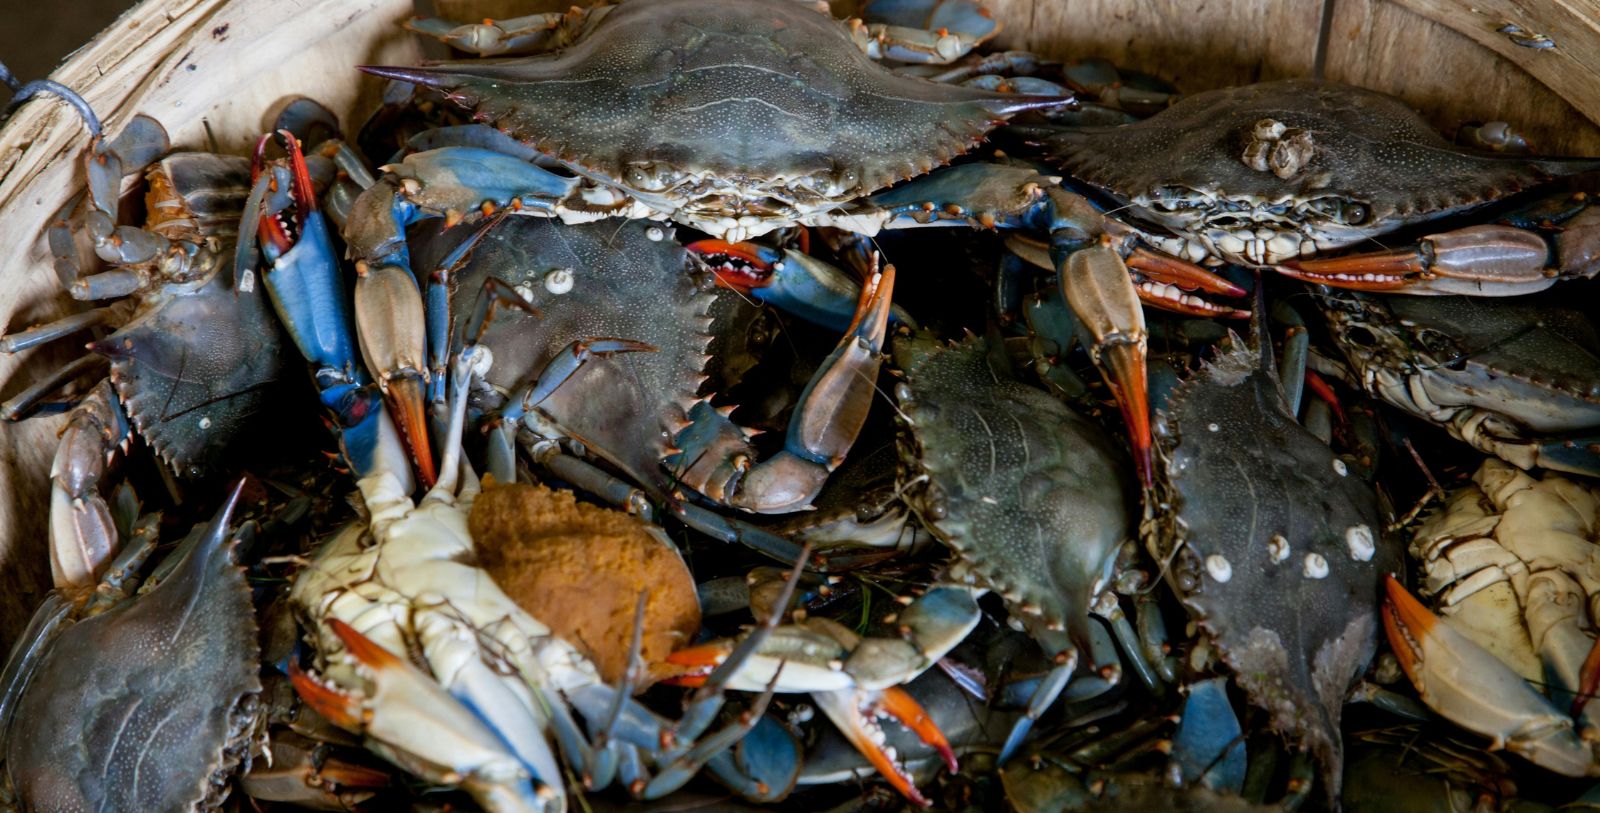 Taste some wonderful Maryland blue crab when out exploring the area.